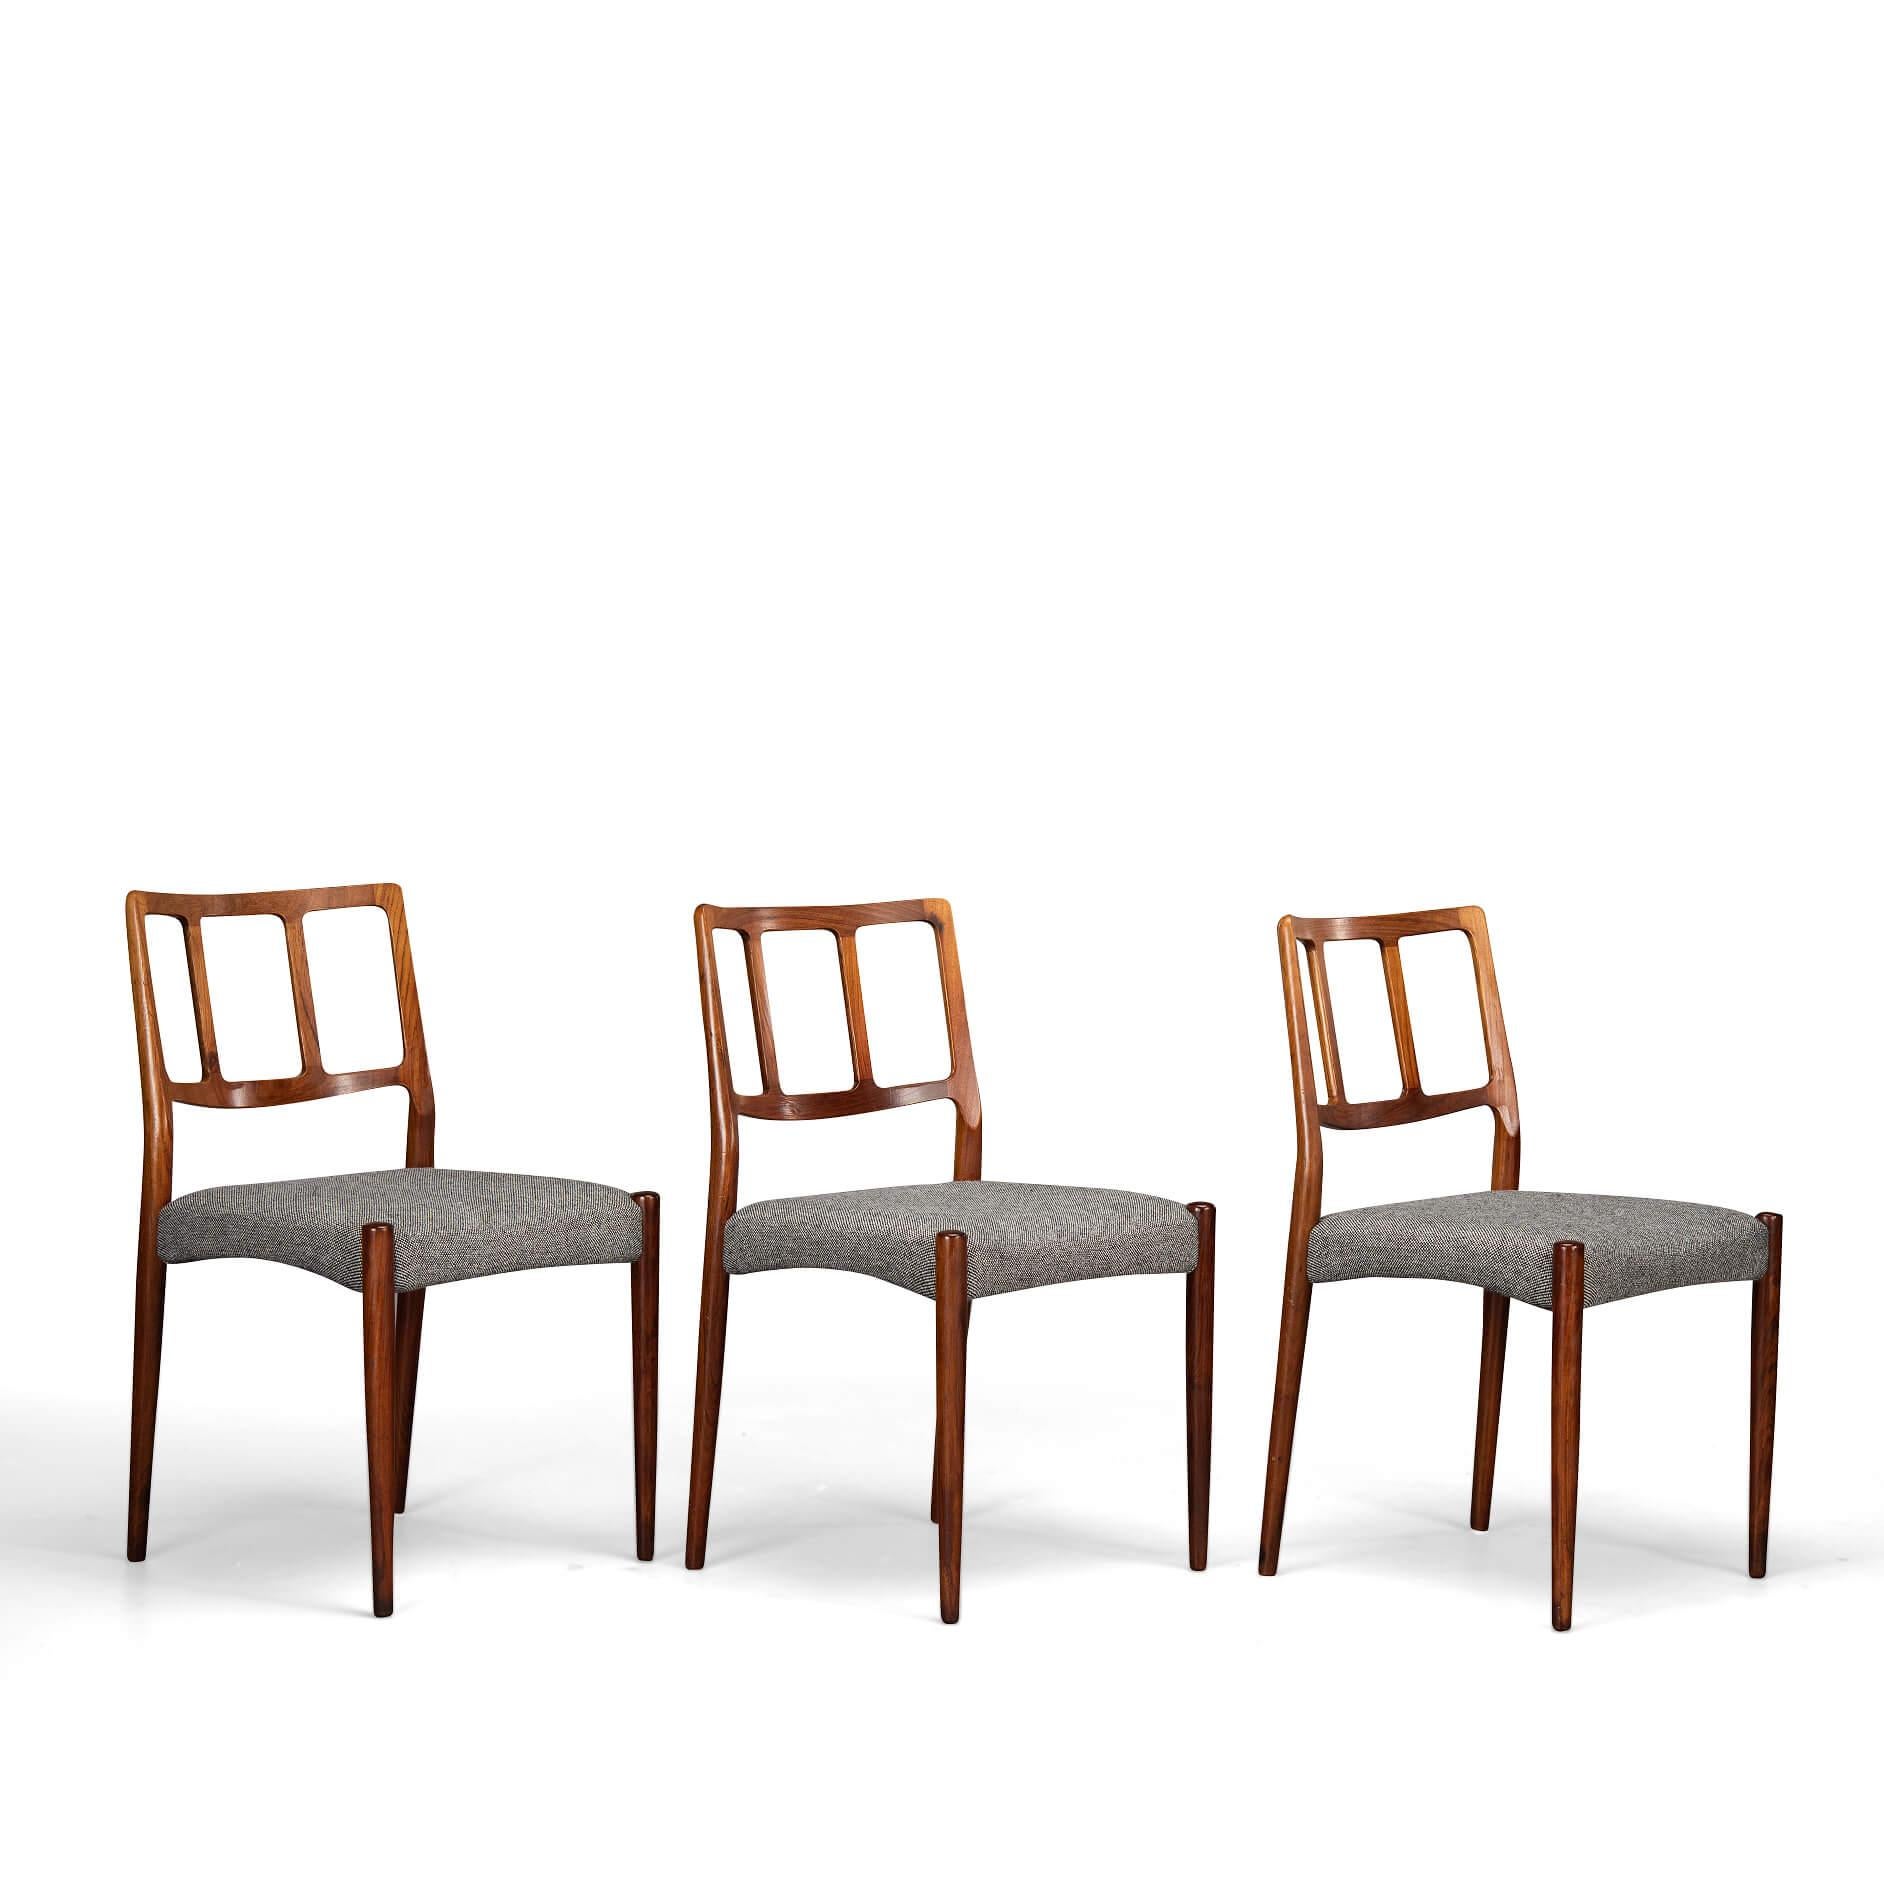 Reupholstered Rosewood Dining Chair by Johannes Andersen for Uldum, Set of 6 For Sale 5